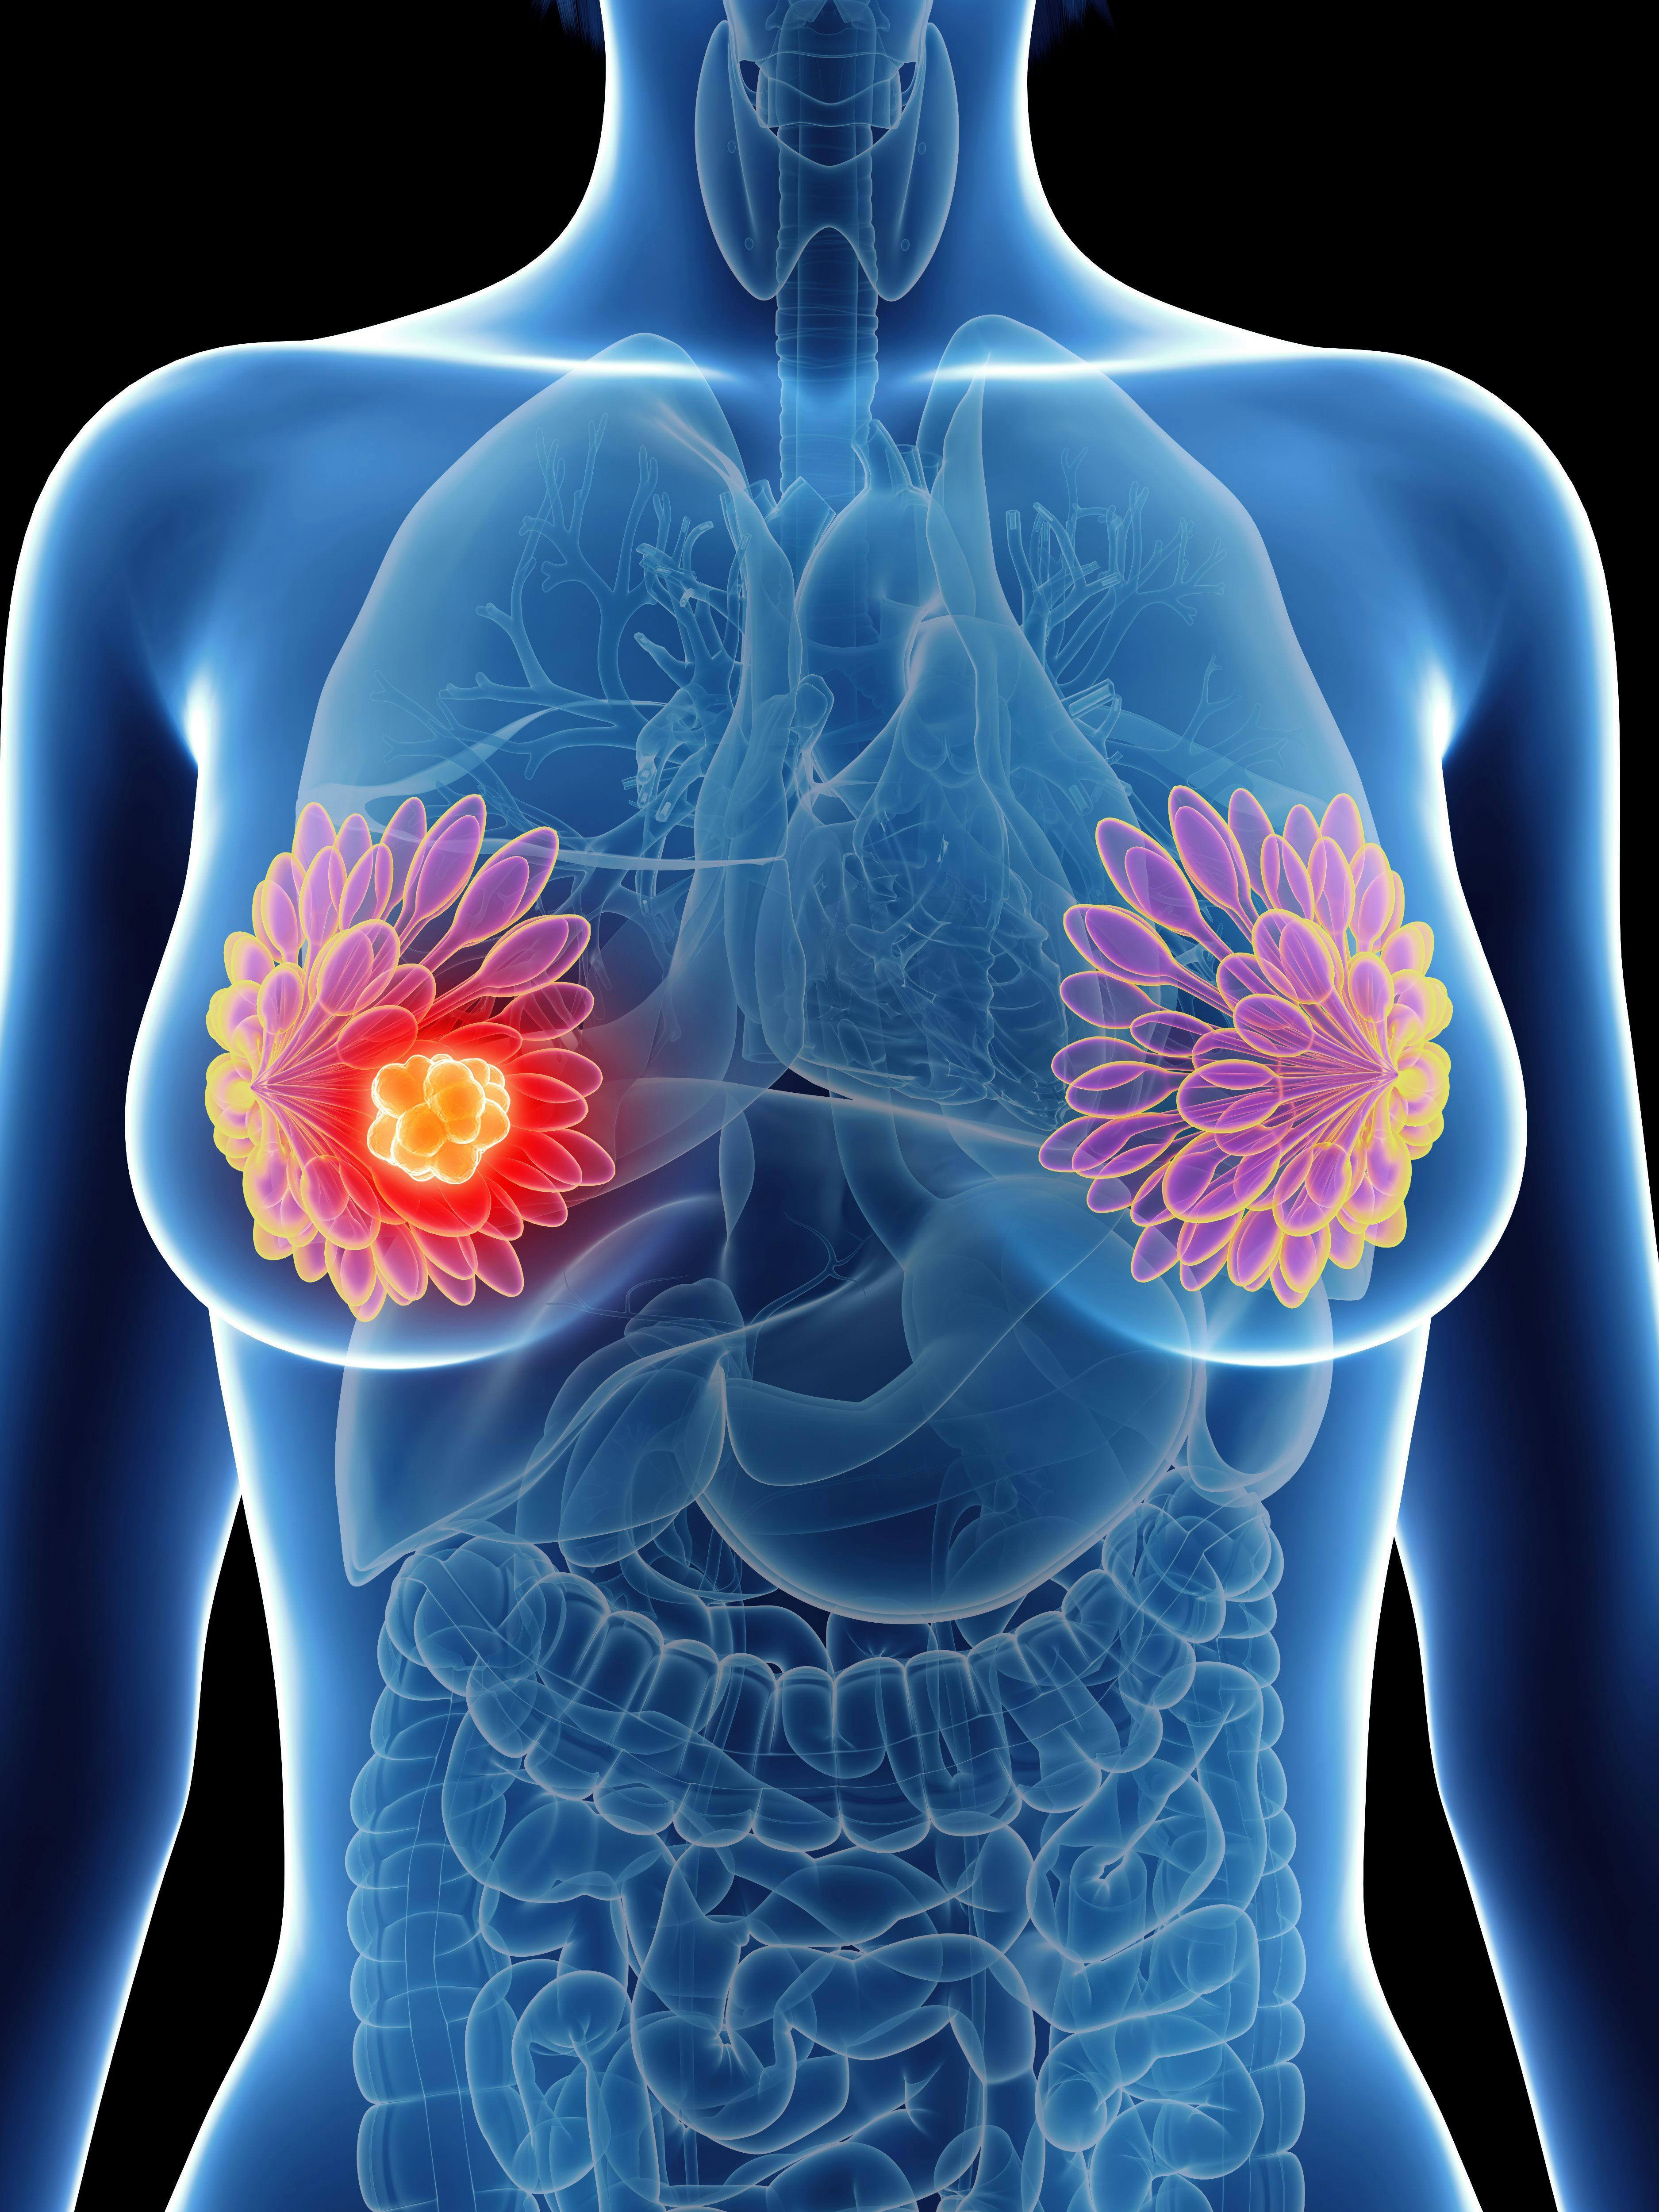 Tamoxifen Plus Extended Letrozole Improves DFS in Postmenopausal Breast Cancer 